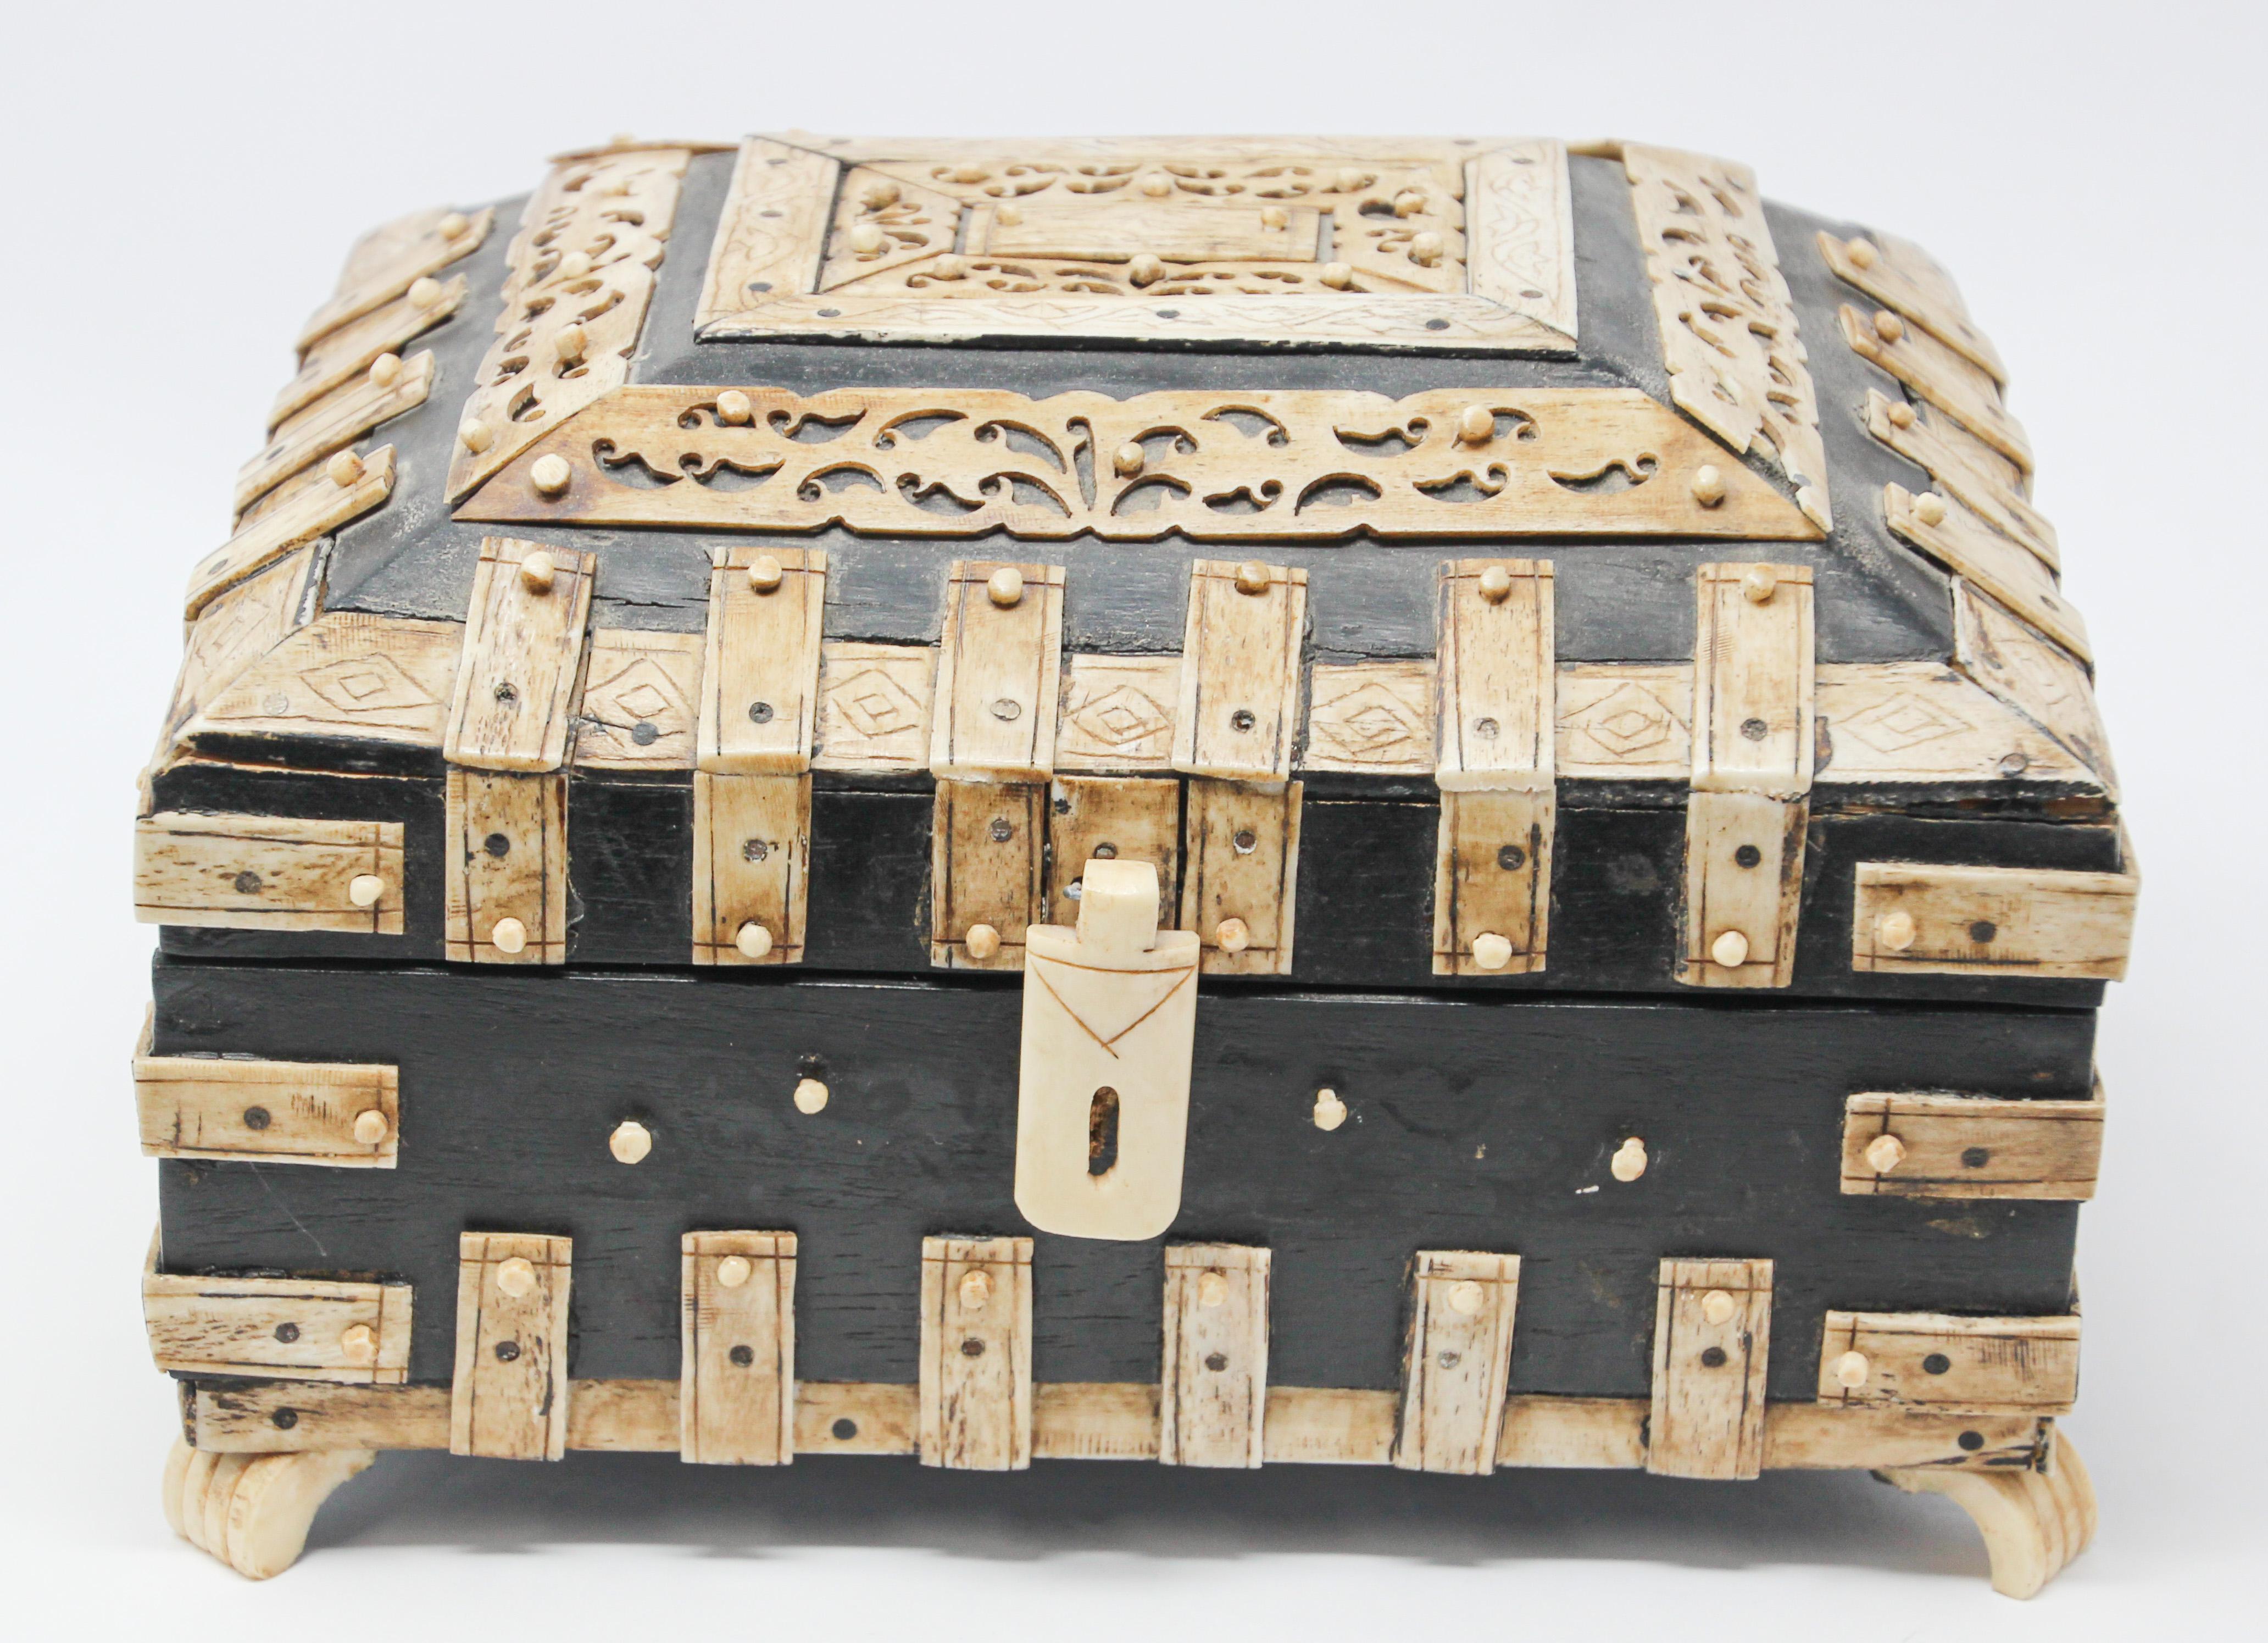 Nice and unusual Jewelry decorative box with filigree bone overlaid decoration.
Large Anglo-Indian footed domed box with exceptional engraved bone details throughout with filigree with arabesque carving.
Vizagapatam, late 19th century.
Dimensions: